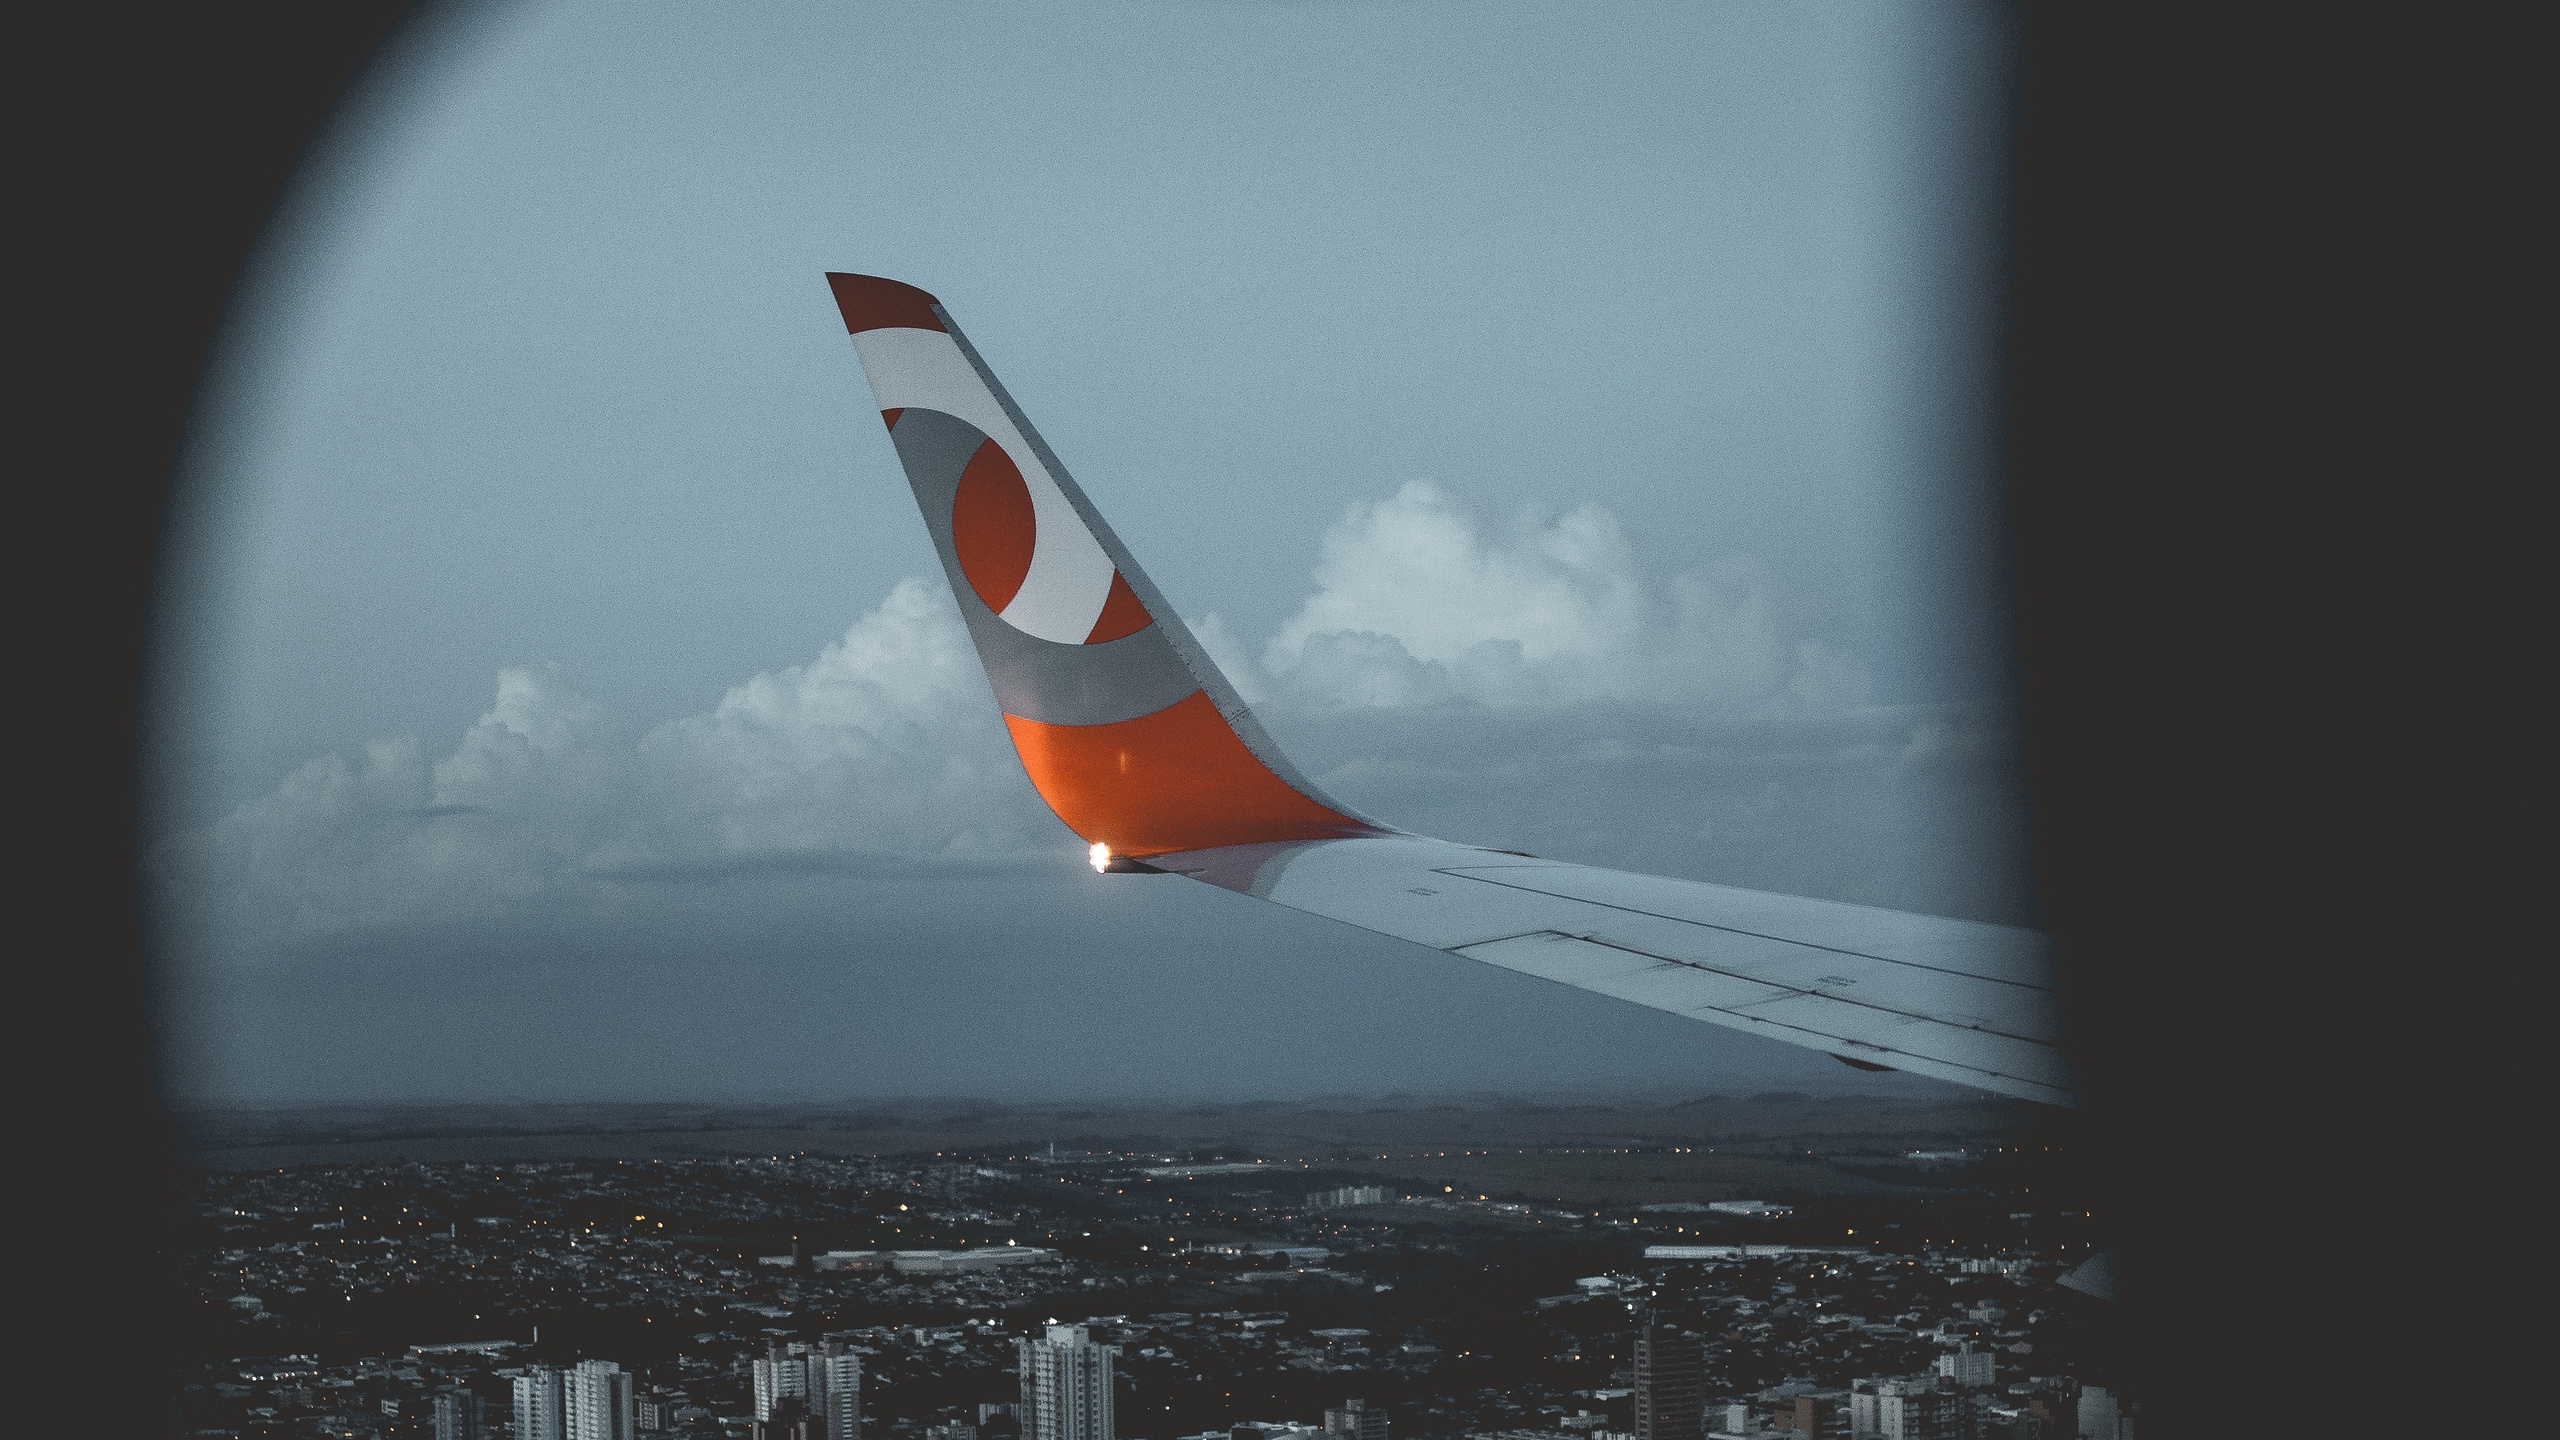 White and Orange Airplane Wing During Daytime. Wallpaper in 2560x1440 Resolution